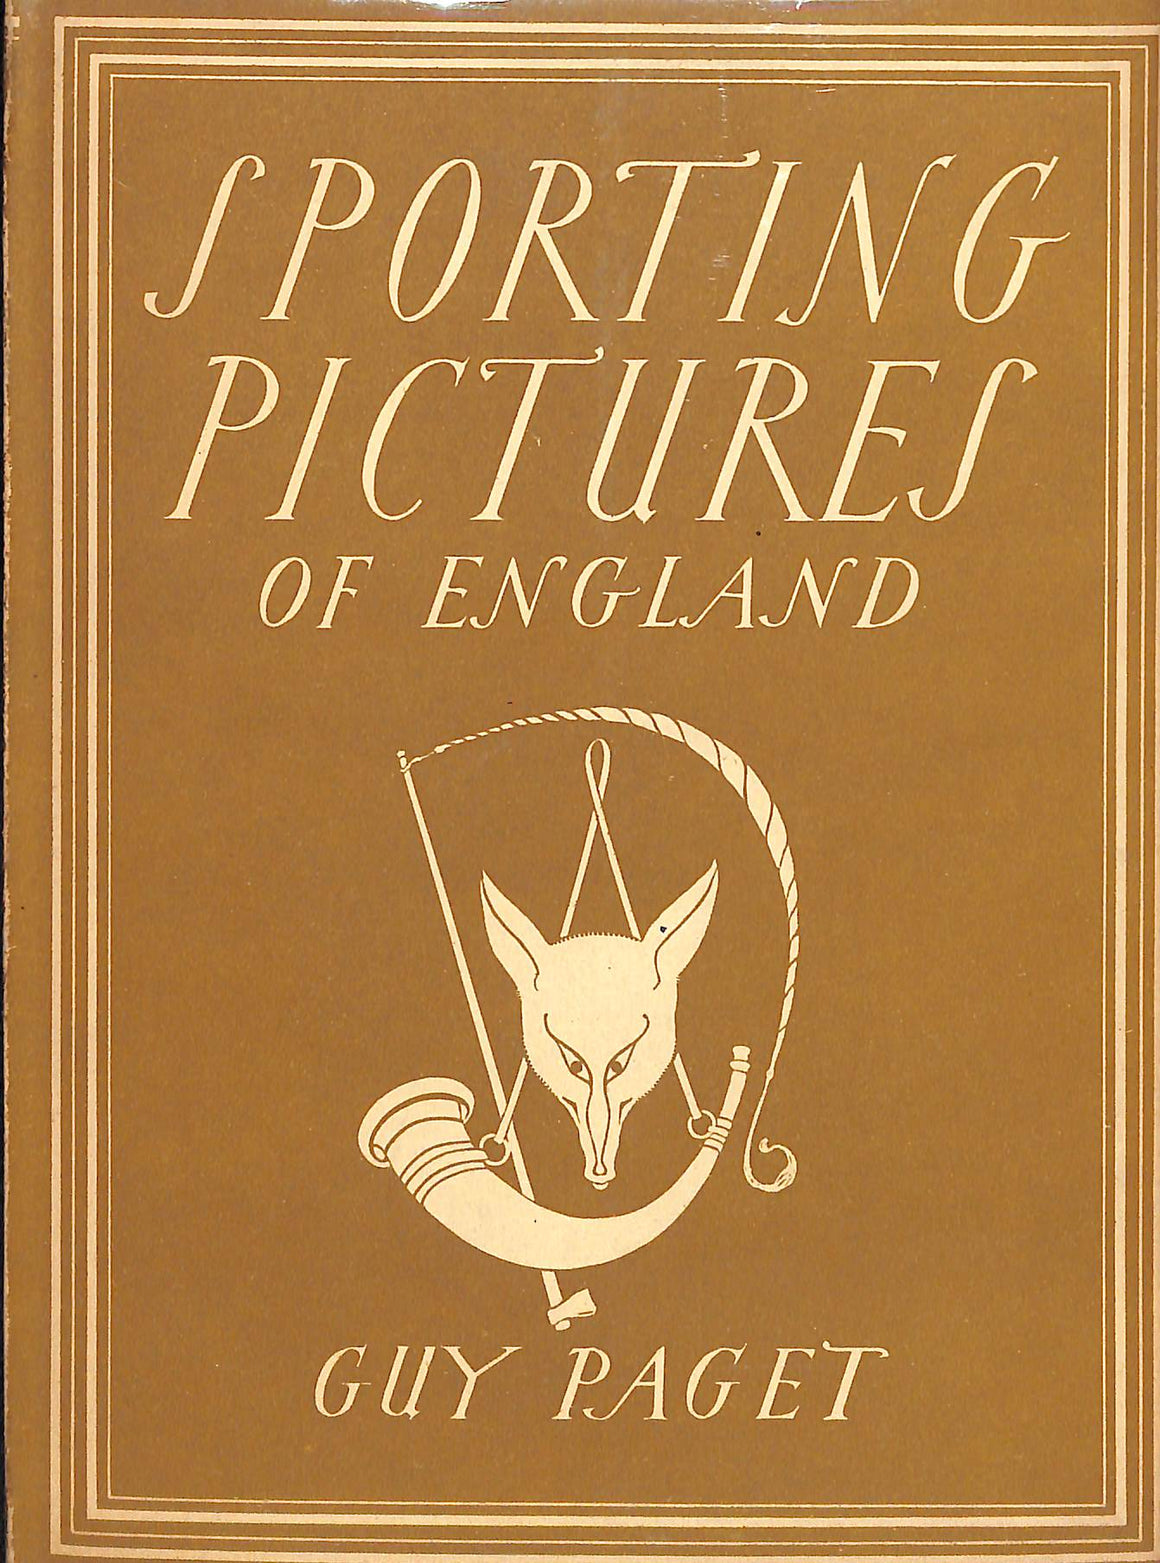 "Sporting Pictures of England"